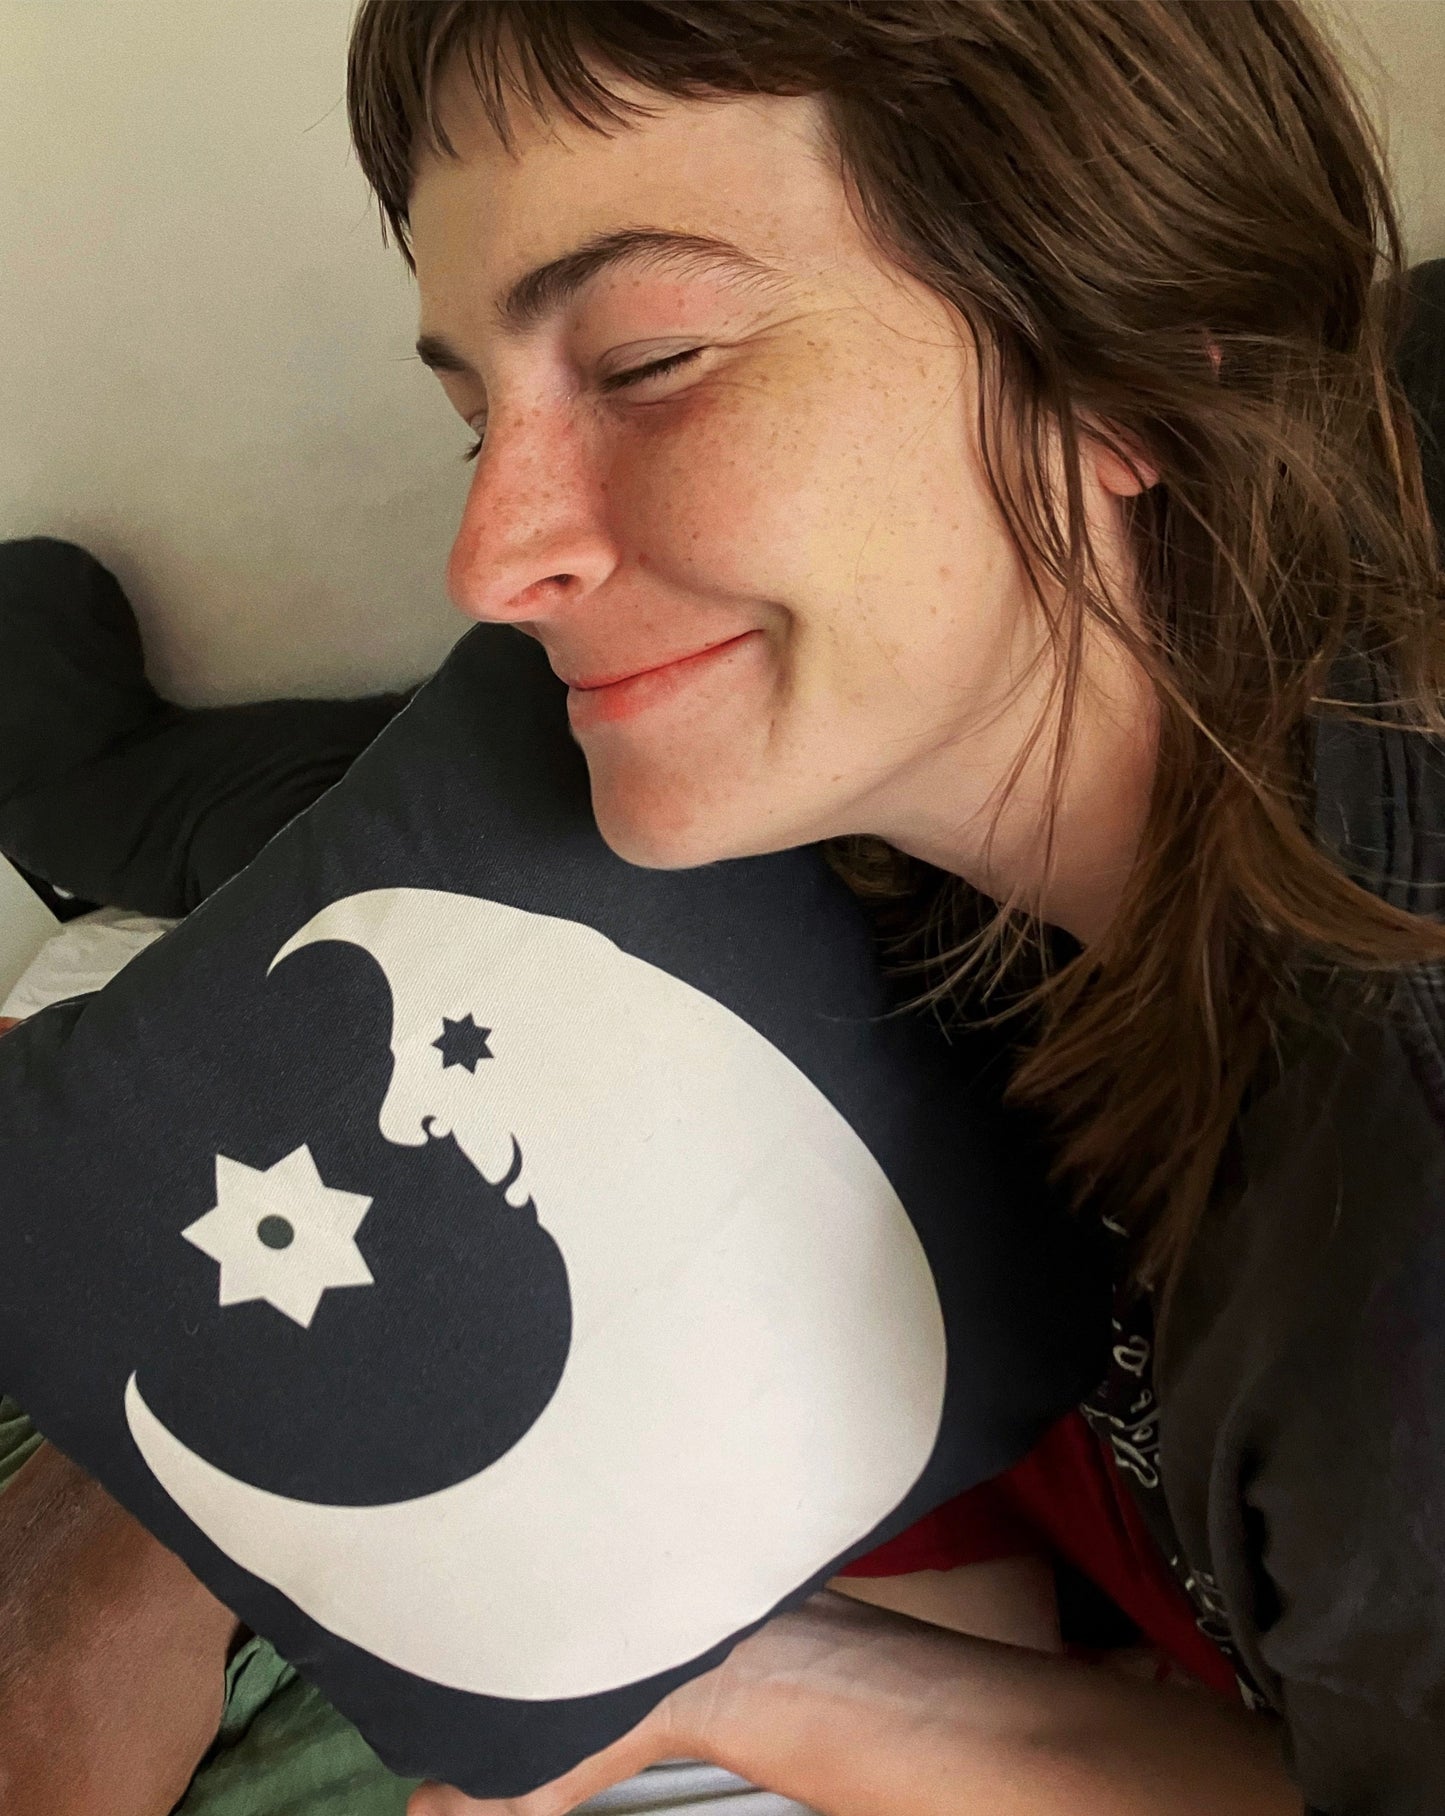 A smiling brunette holding and hugging the black and white lunar fool pillow against her chin, laying down in a bed.